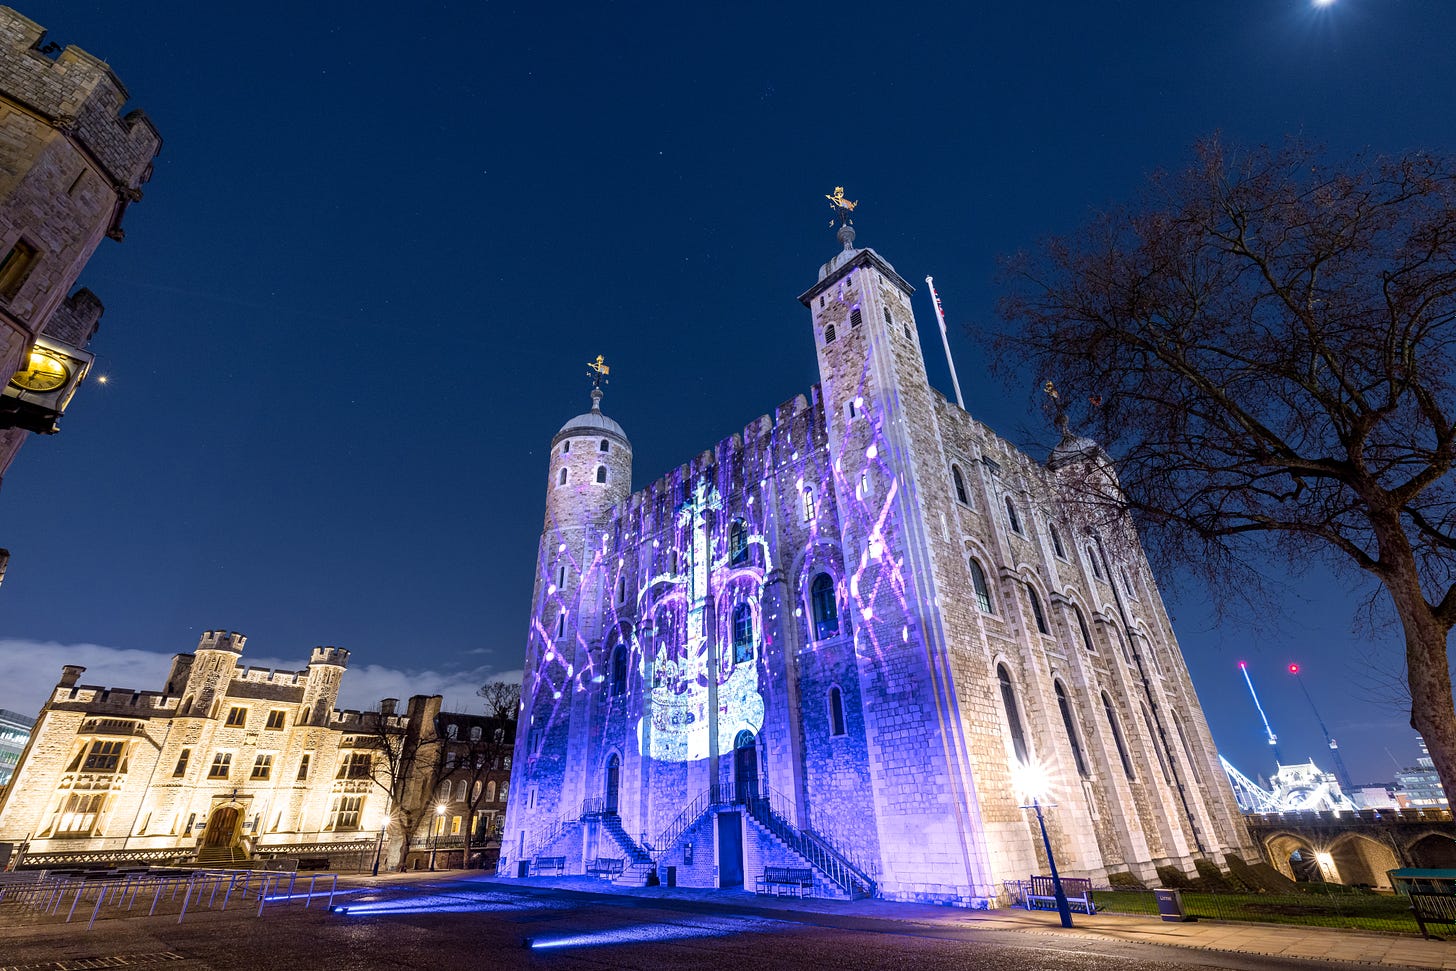 Illuminated Tower of London at night with projection of crown on facde